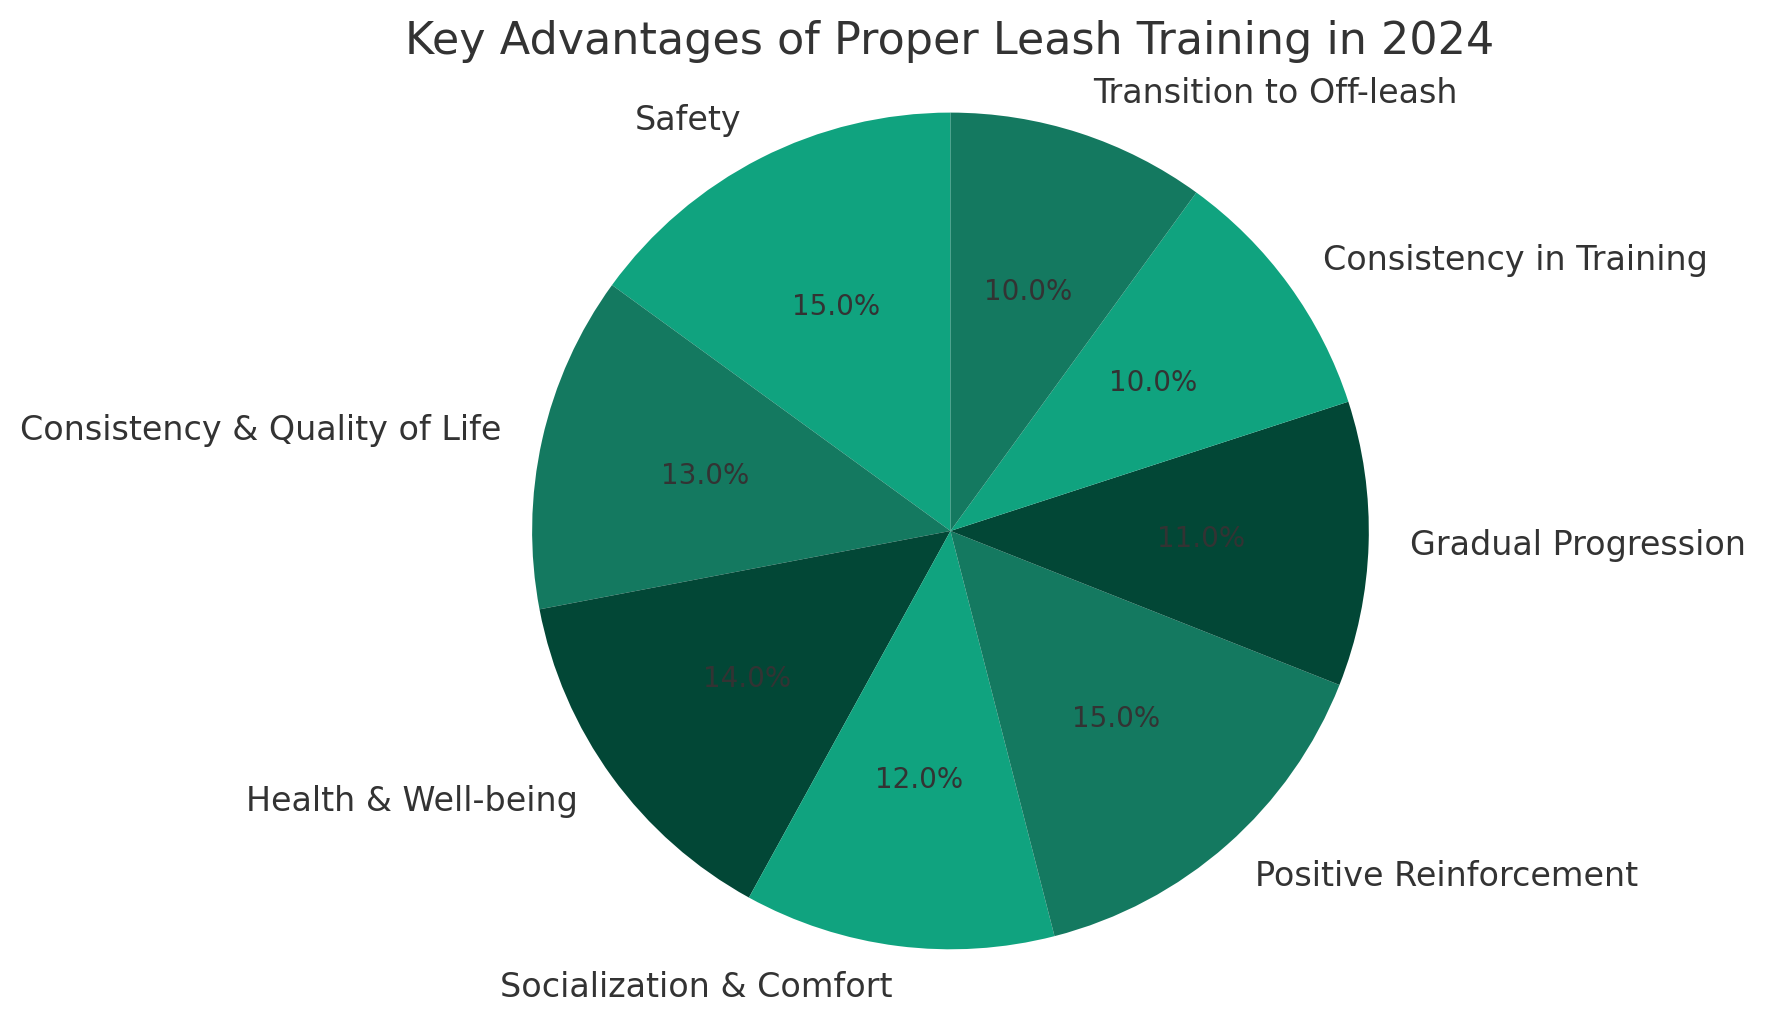 Perceived Importance of Leash Training Benefits